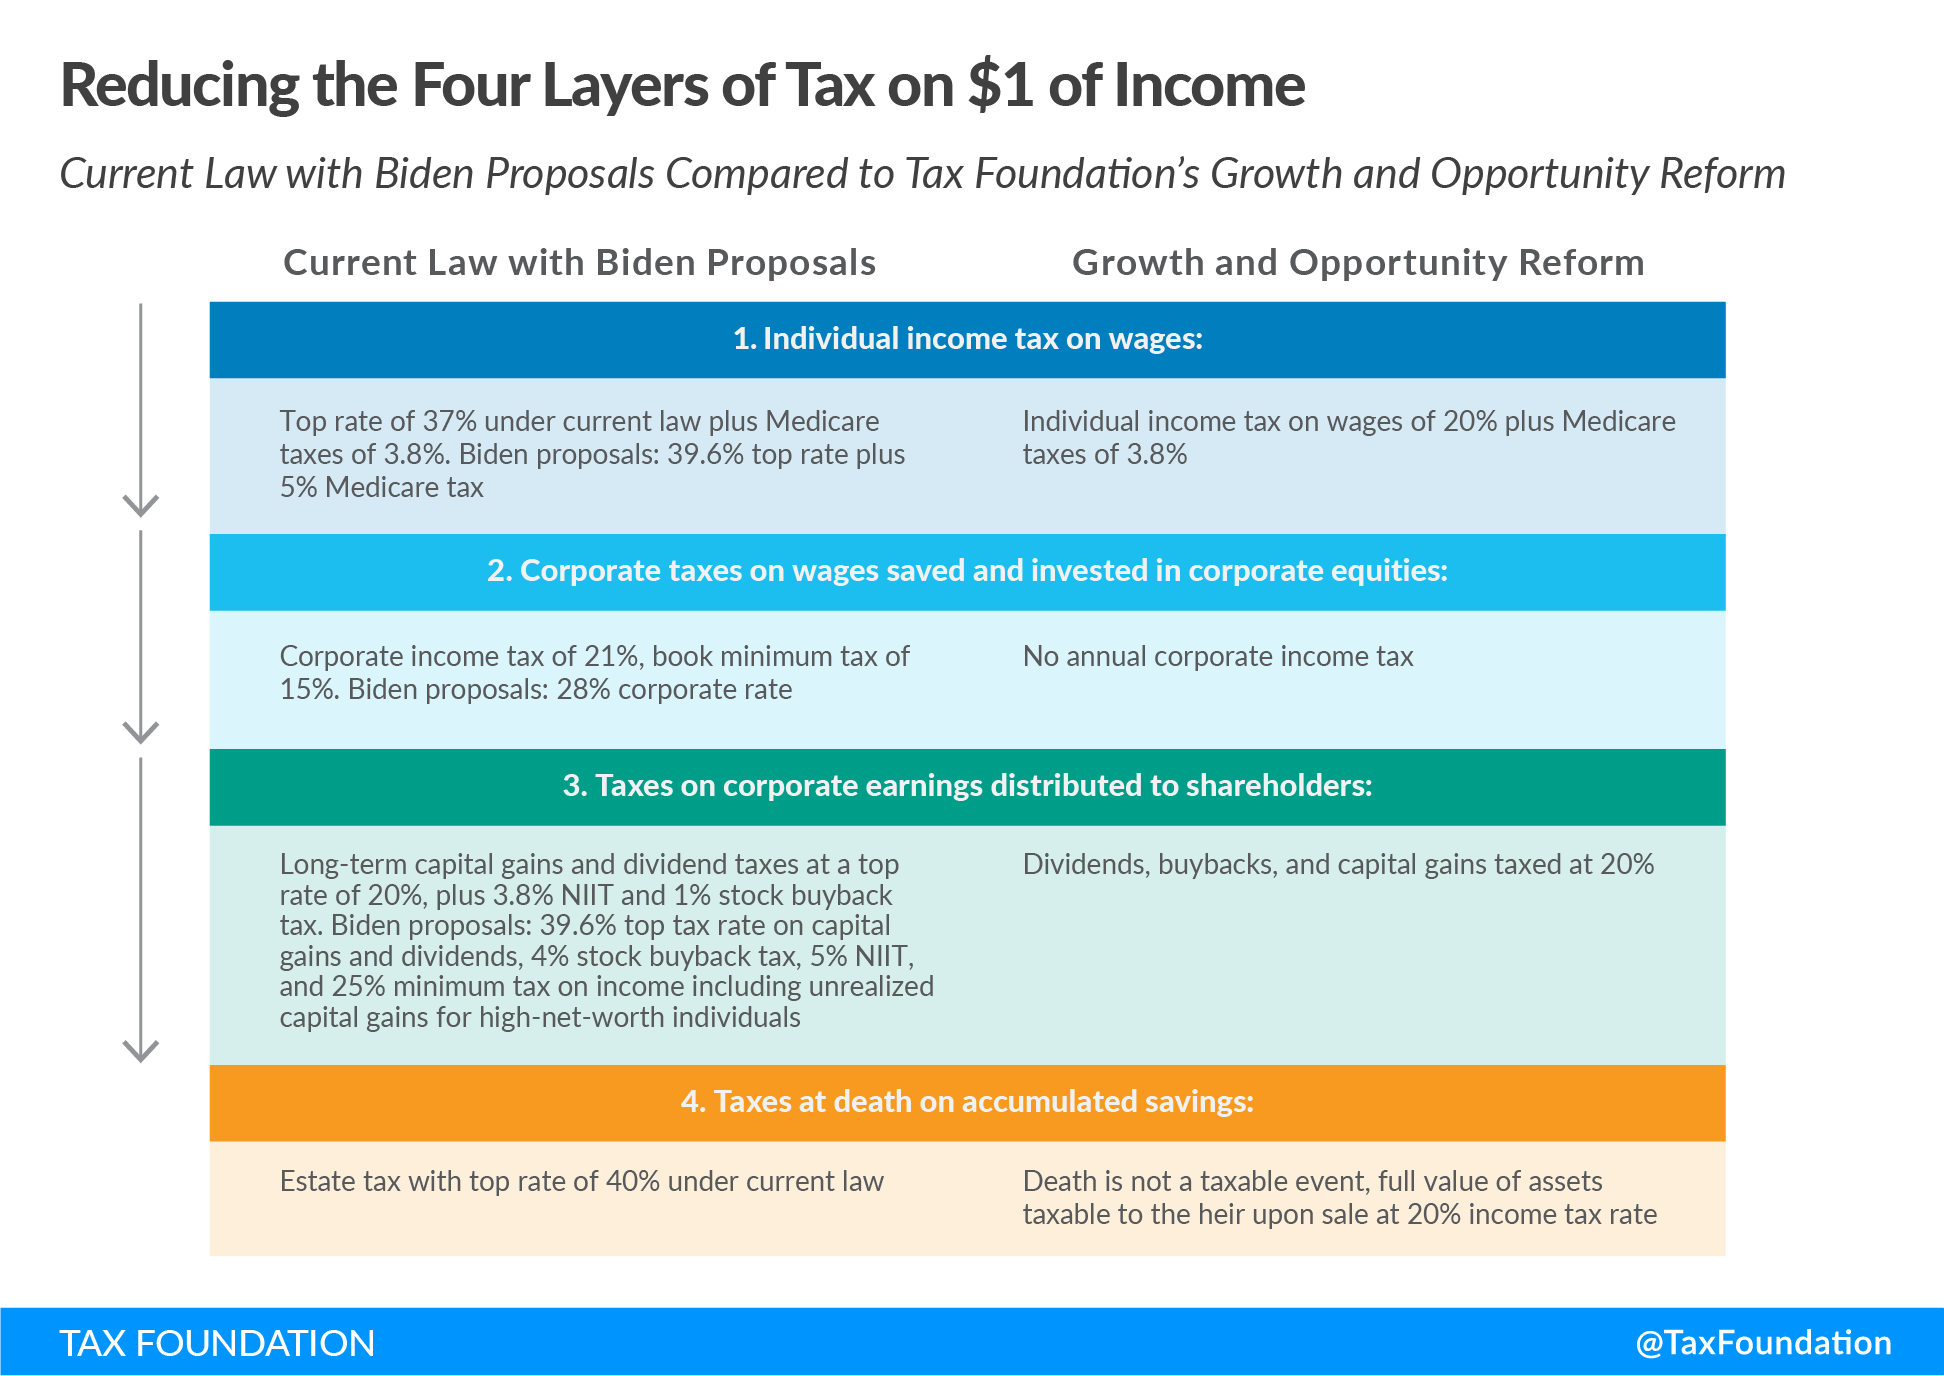 President Biden tax fairness plan includes complexity and double taxation including Biden taxes on investment and saving